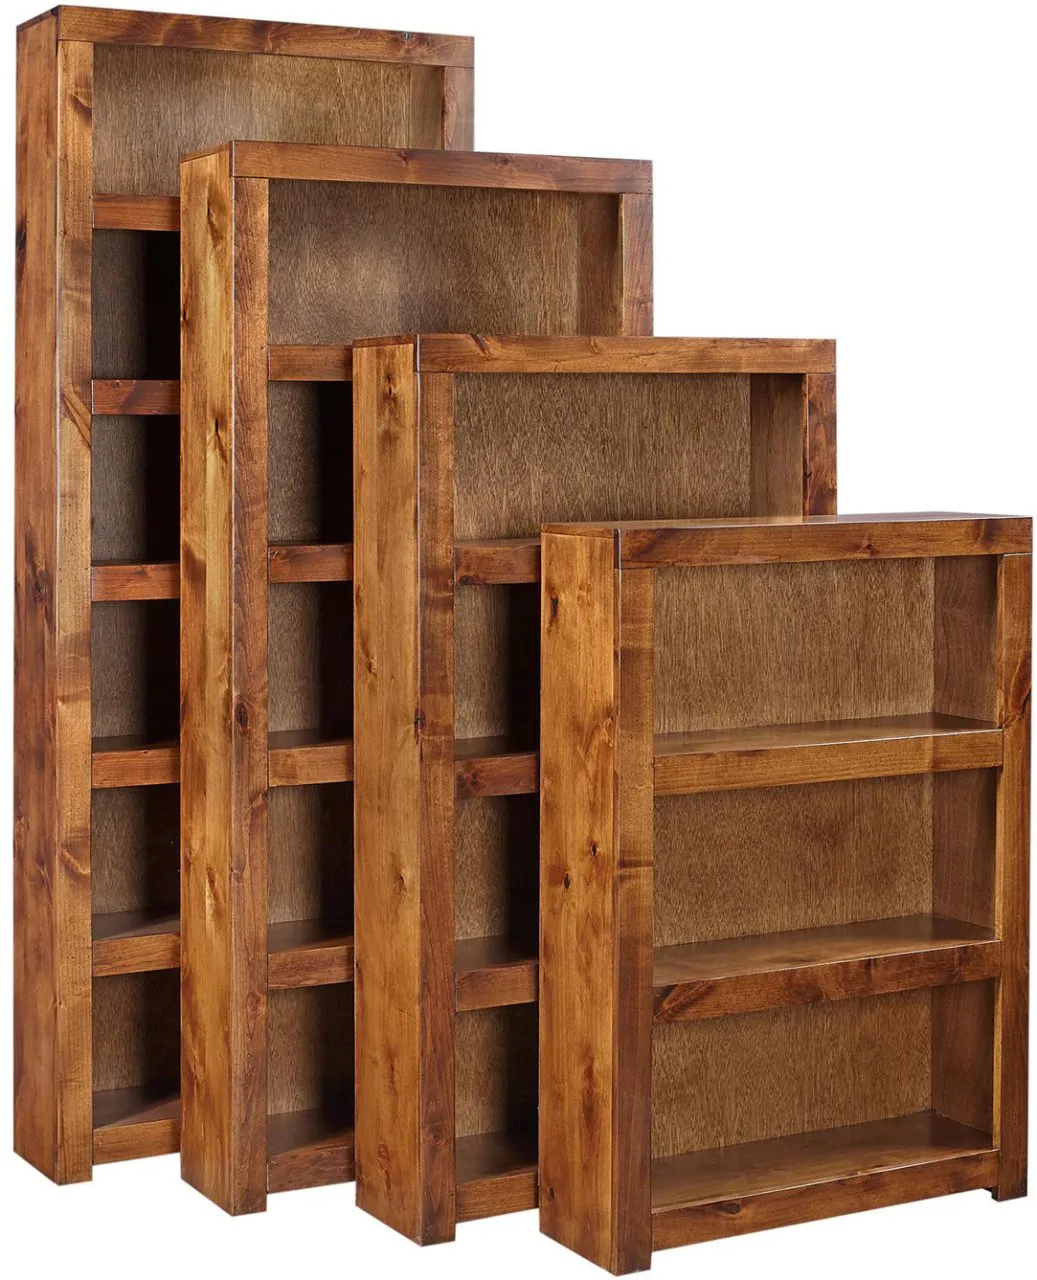 LIFESTYLE TOBACCO 48 INCH BOOKCASES